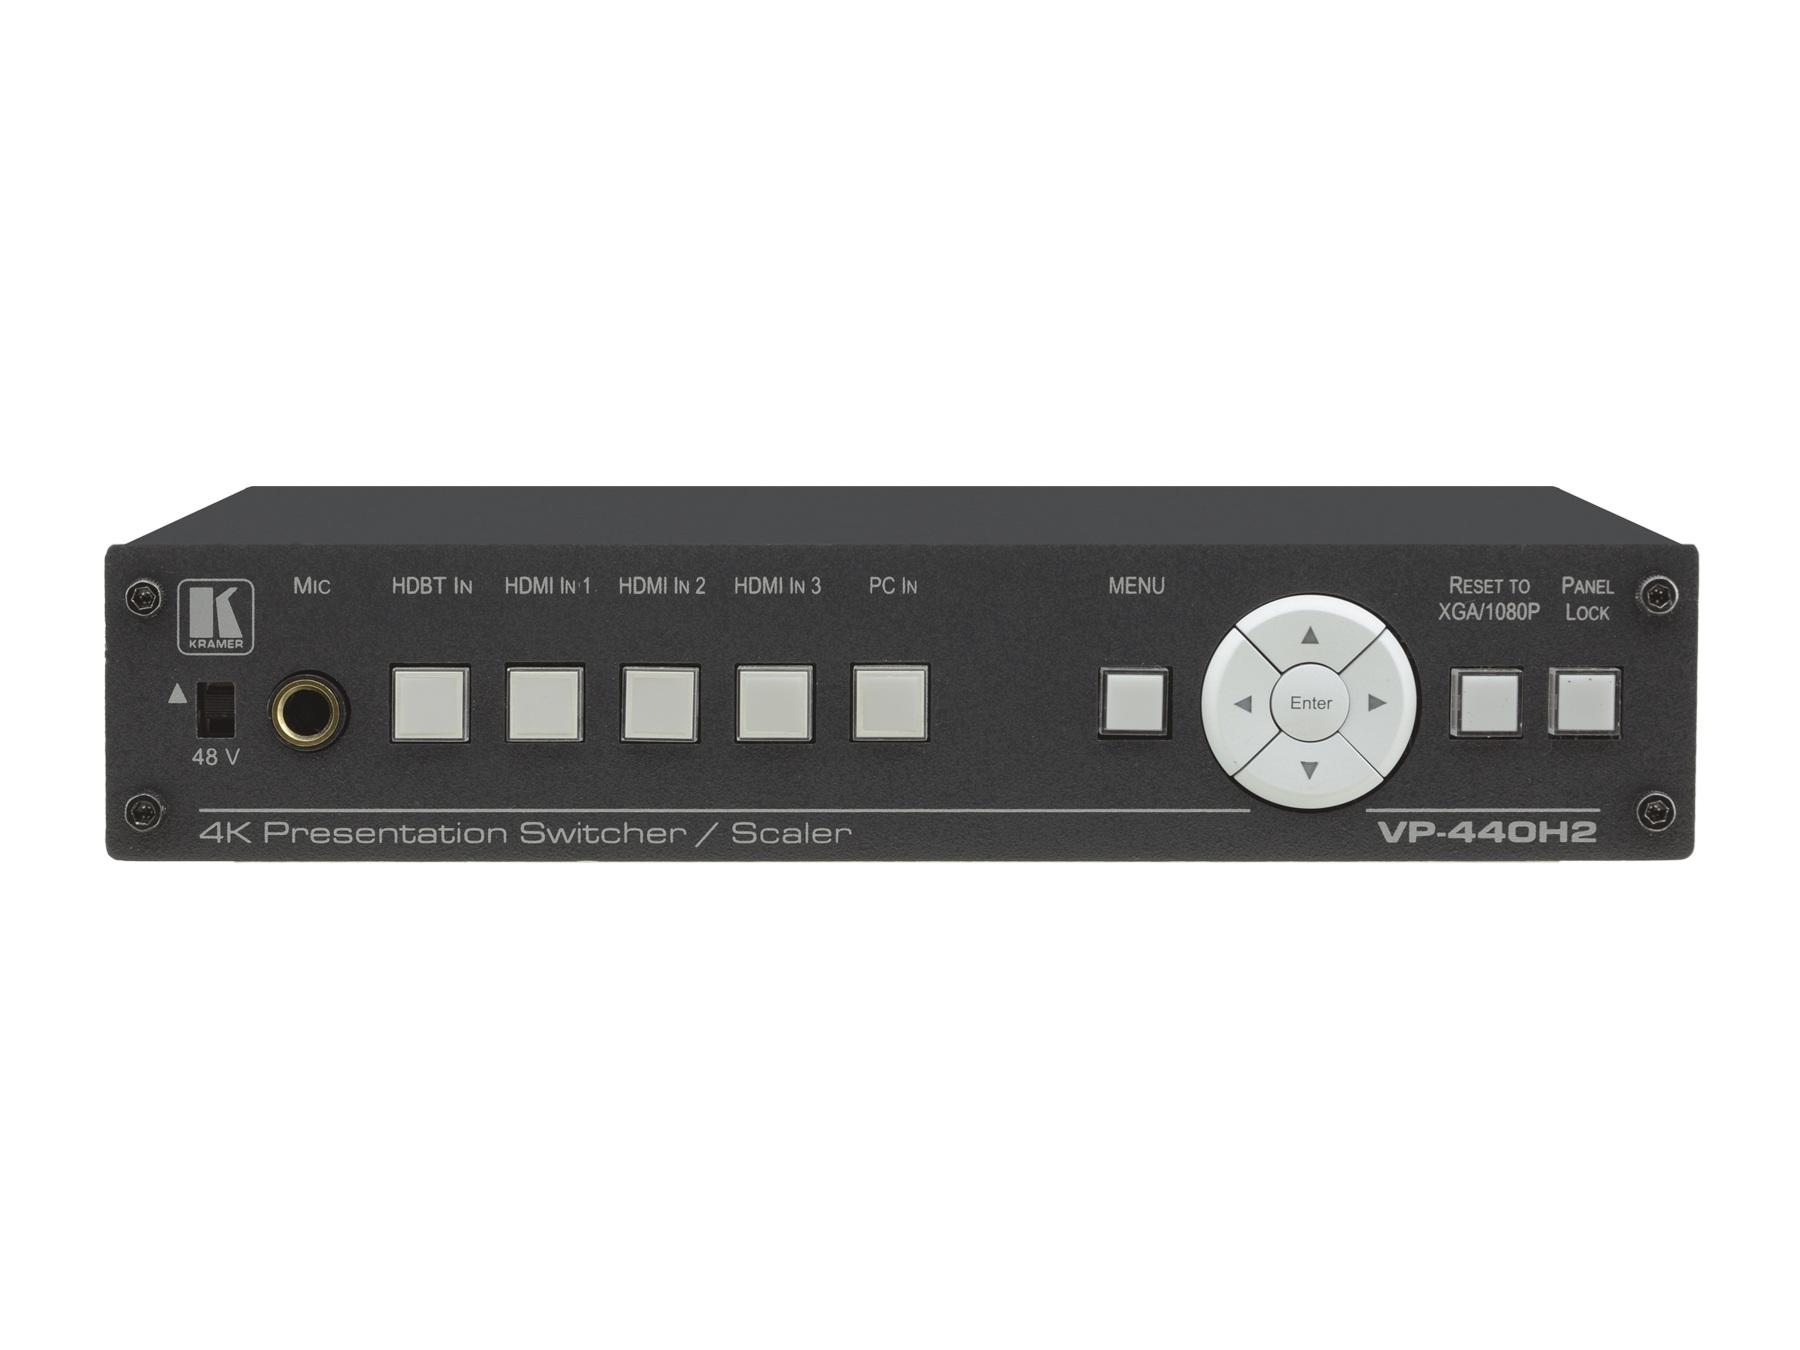 VP-440H2 Compact 5-Input 4K60 Presentation Switcher/Scaler with HDBaseT/HDMI Simultaneous Outputs by Kramer